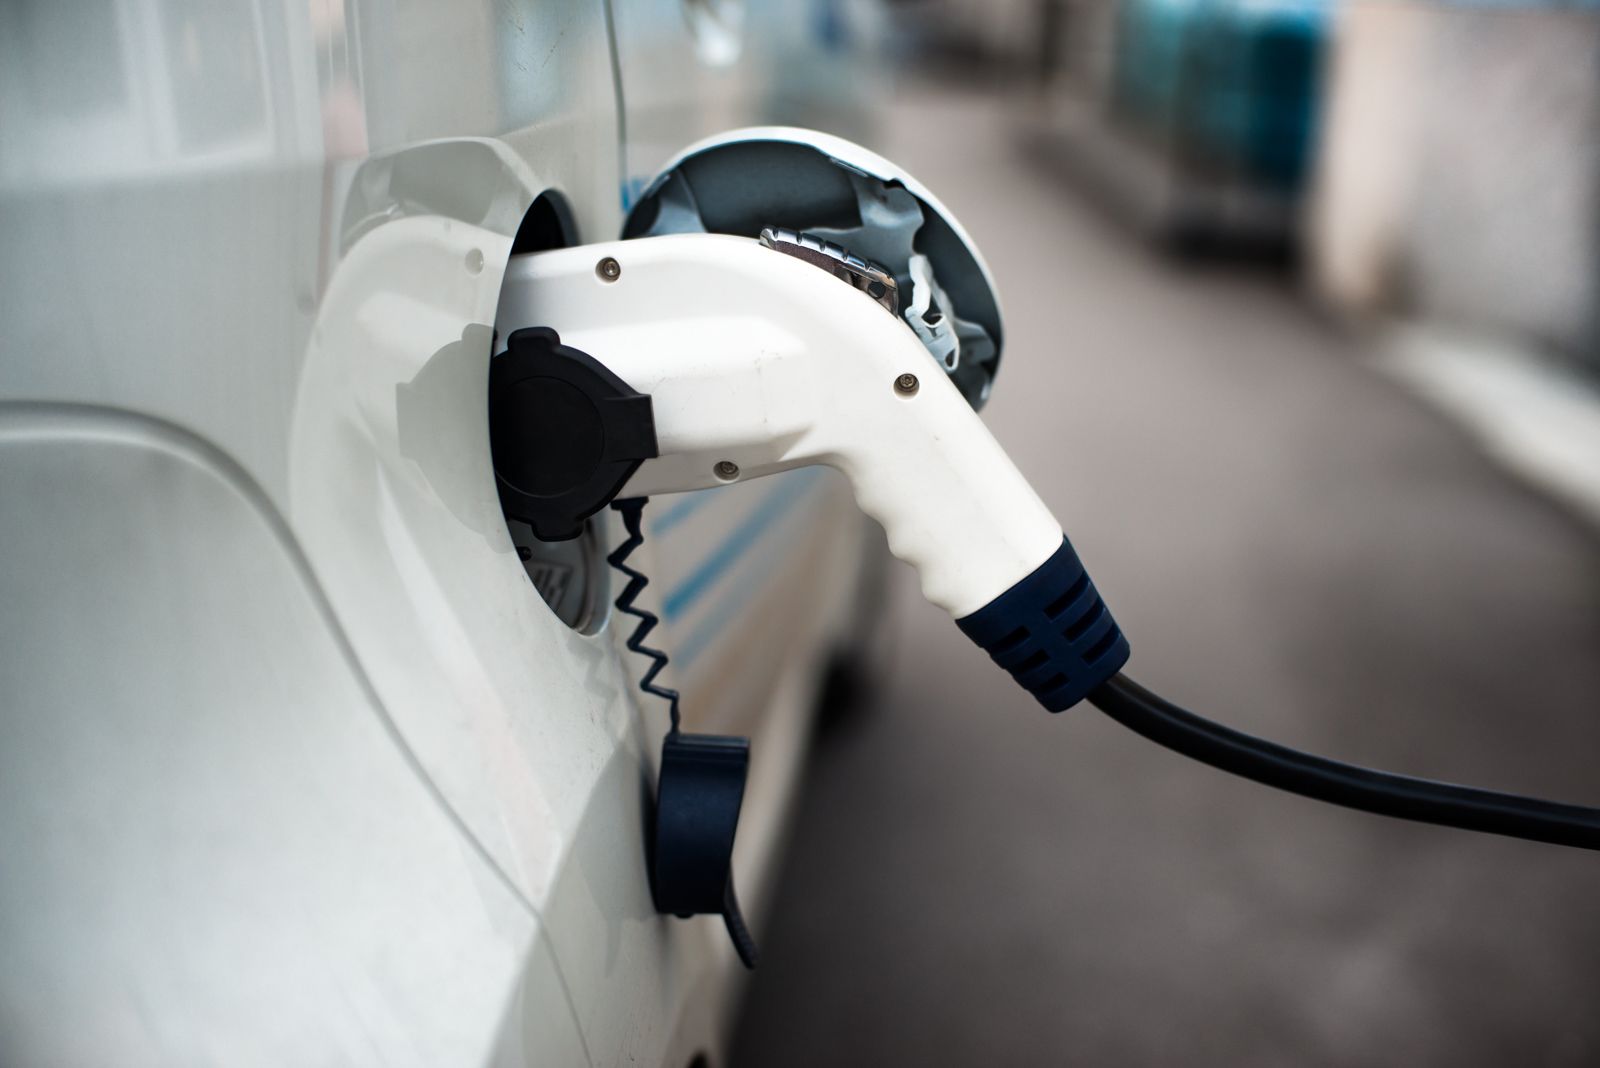 NMI POWERS MOBILITY INFRASTRUCTURE STANDARDIZATION WITH ENHANCED EV CHARGING COMPETENCIES